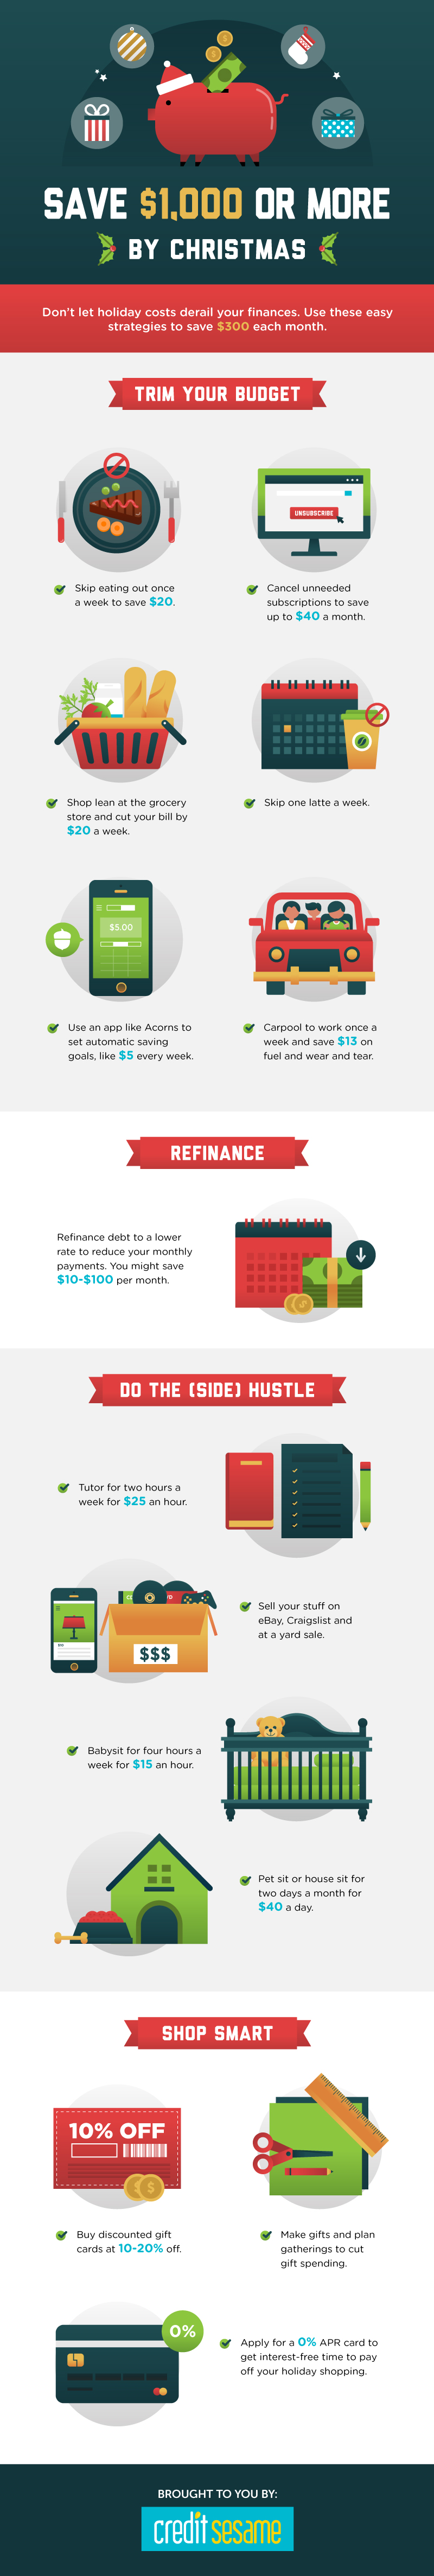 Infographic for Save $1000 or More by Christmas